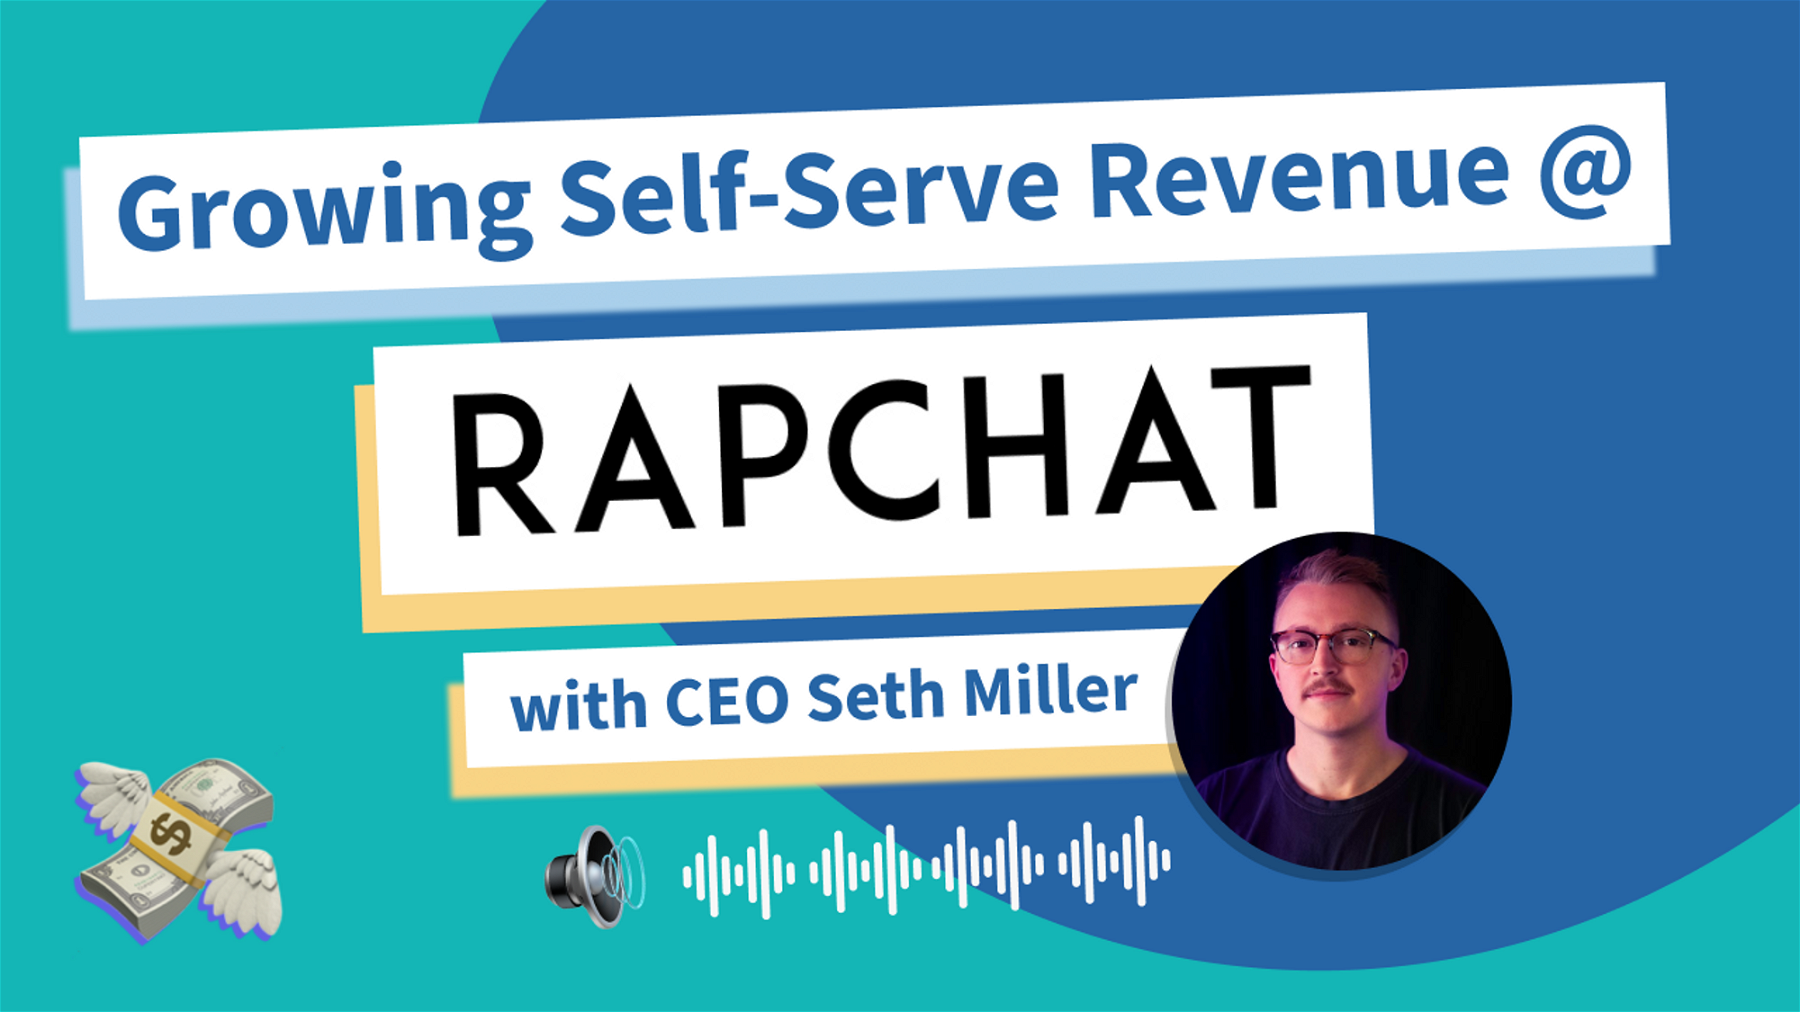 Growing Self-Serve Revenue at Rapchat (with CEO Seth Miller)